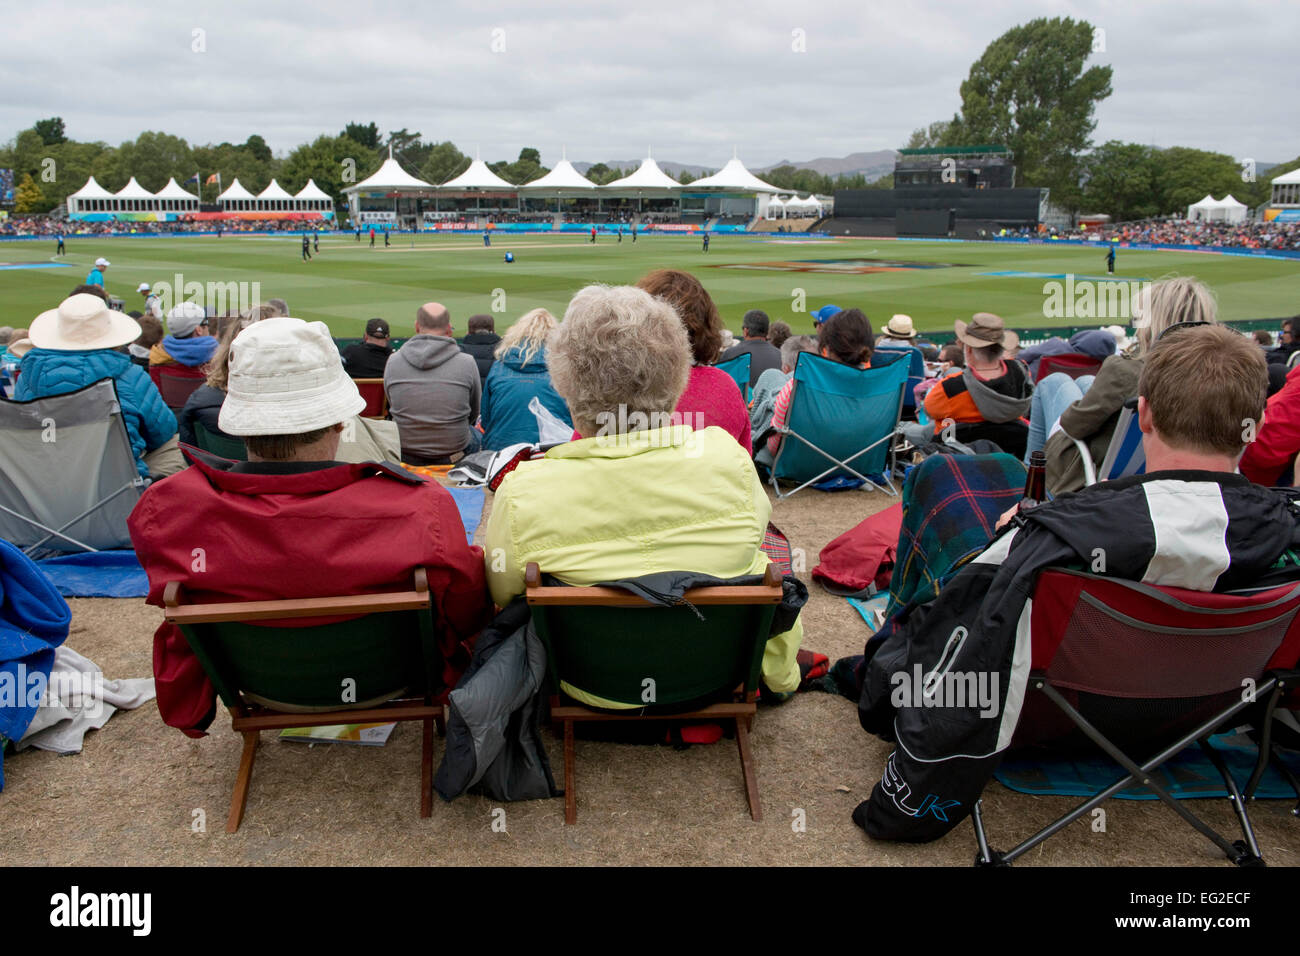 Christchurch, New Zealand, Feature. 14th Feb, 2015. Christchurch, New Zealand - February 14, 2015 - Elder spectators during the ICC Cricket World Cup Match between Sri Lanka and New Zealand at Hagley Oval on February 14, 2015 in Christchurch, New Zealand, Feature. © dpa/Alamy Live News Stock Photo